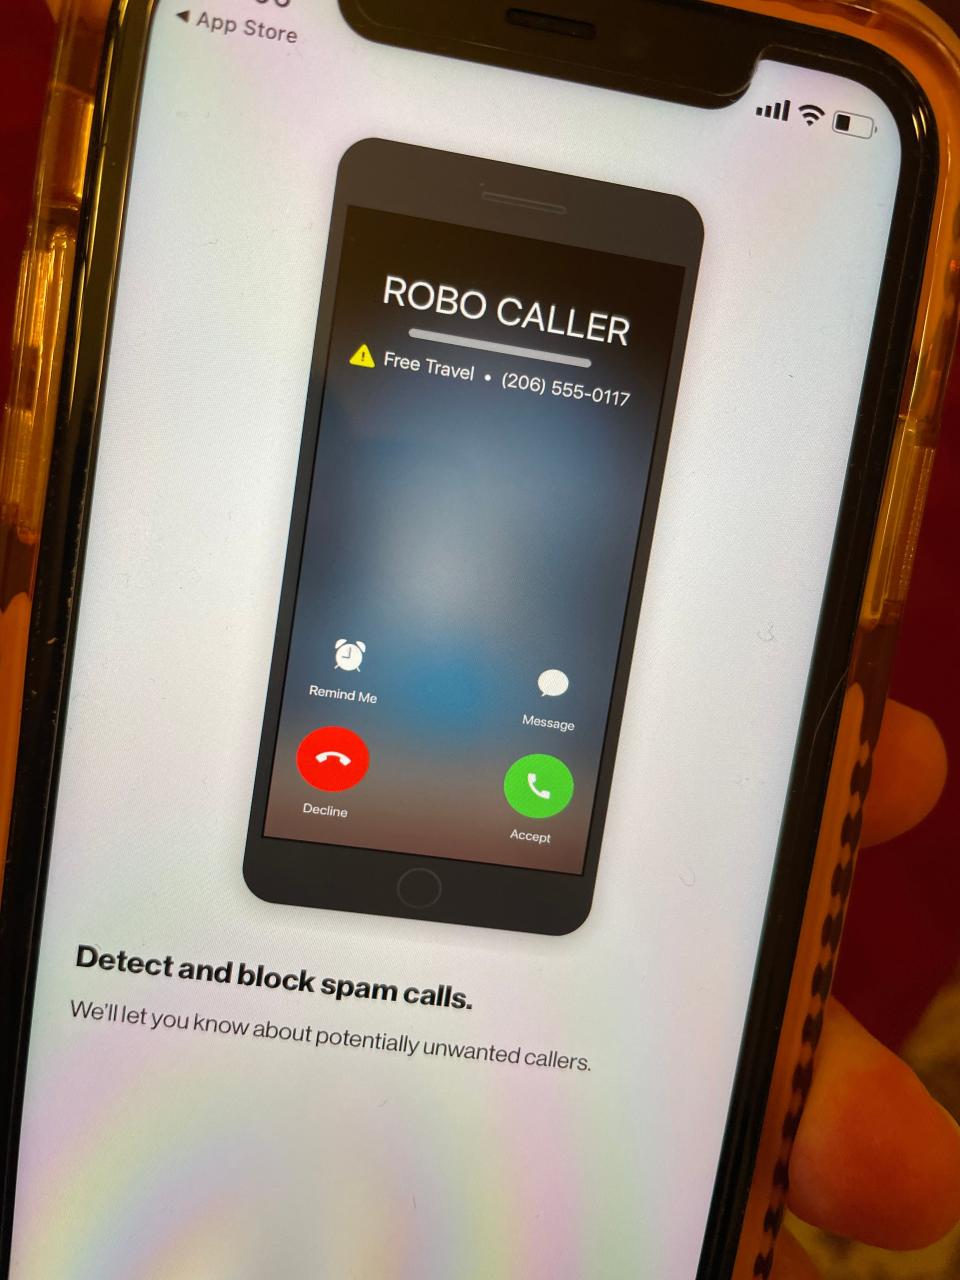 A robocall blocking software app to detect and block spam calls on Verizon Wireless smartphone.